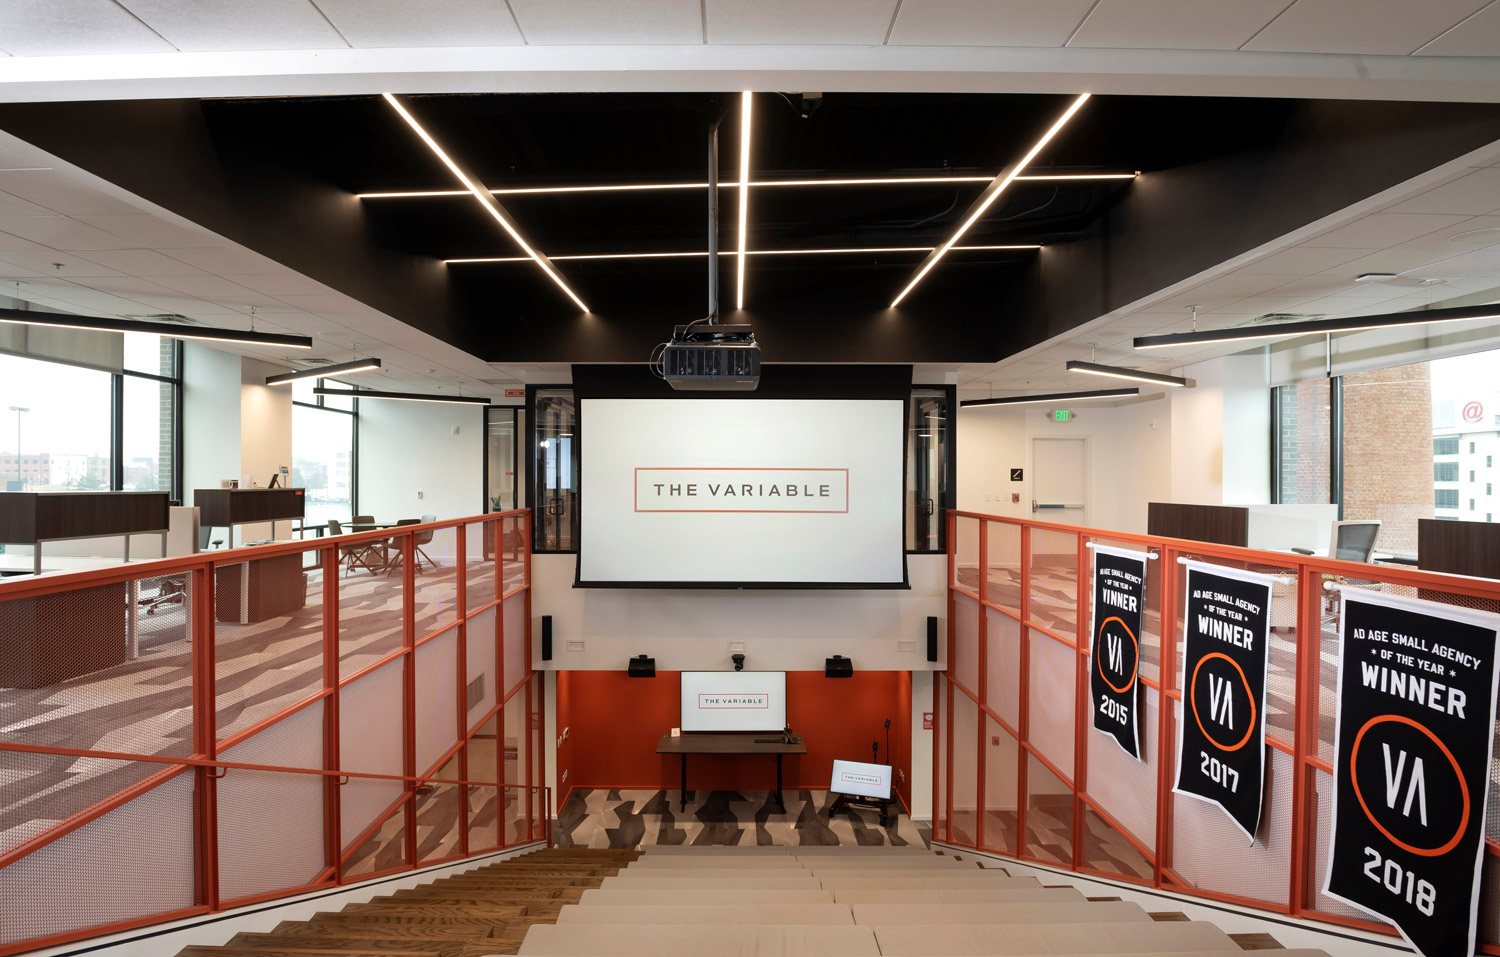 Thumbnail image of a multi-level office space with a ceiling-mounted projector and screen.